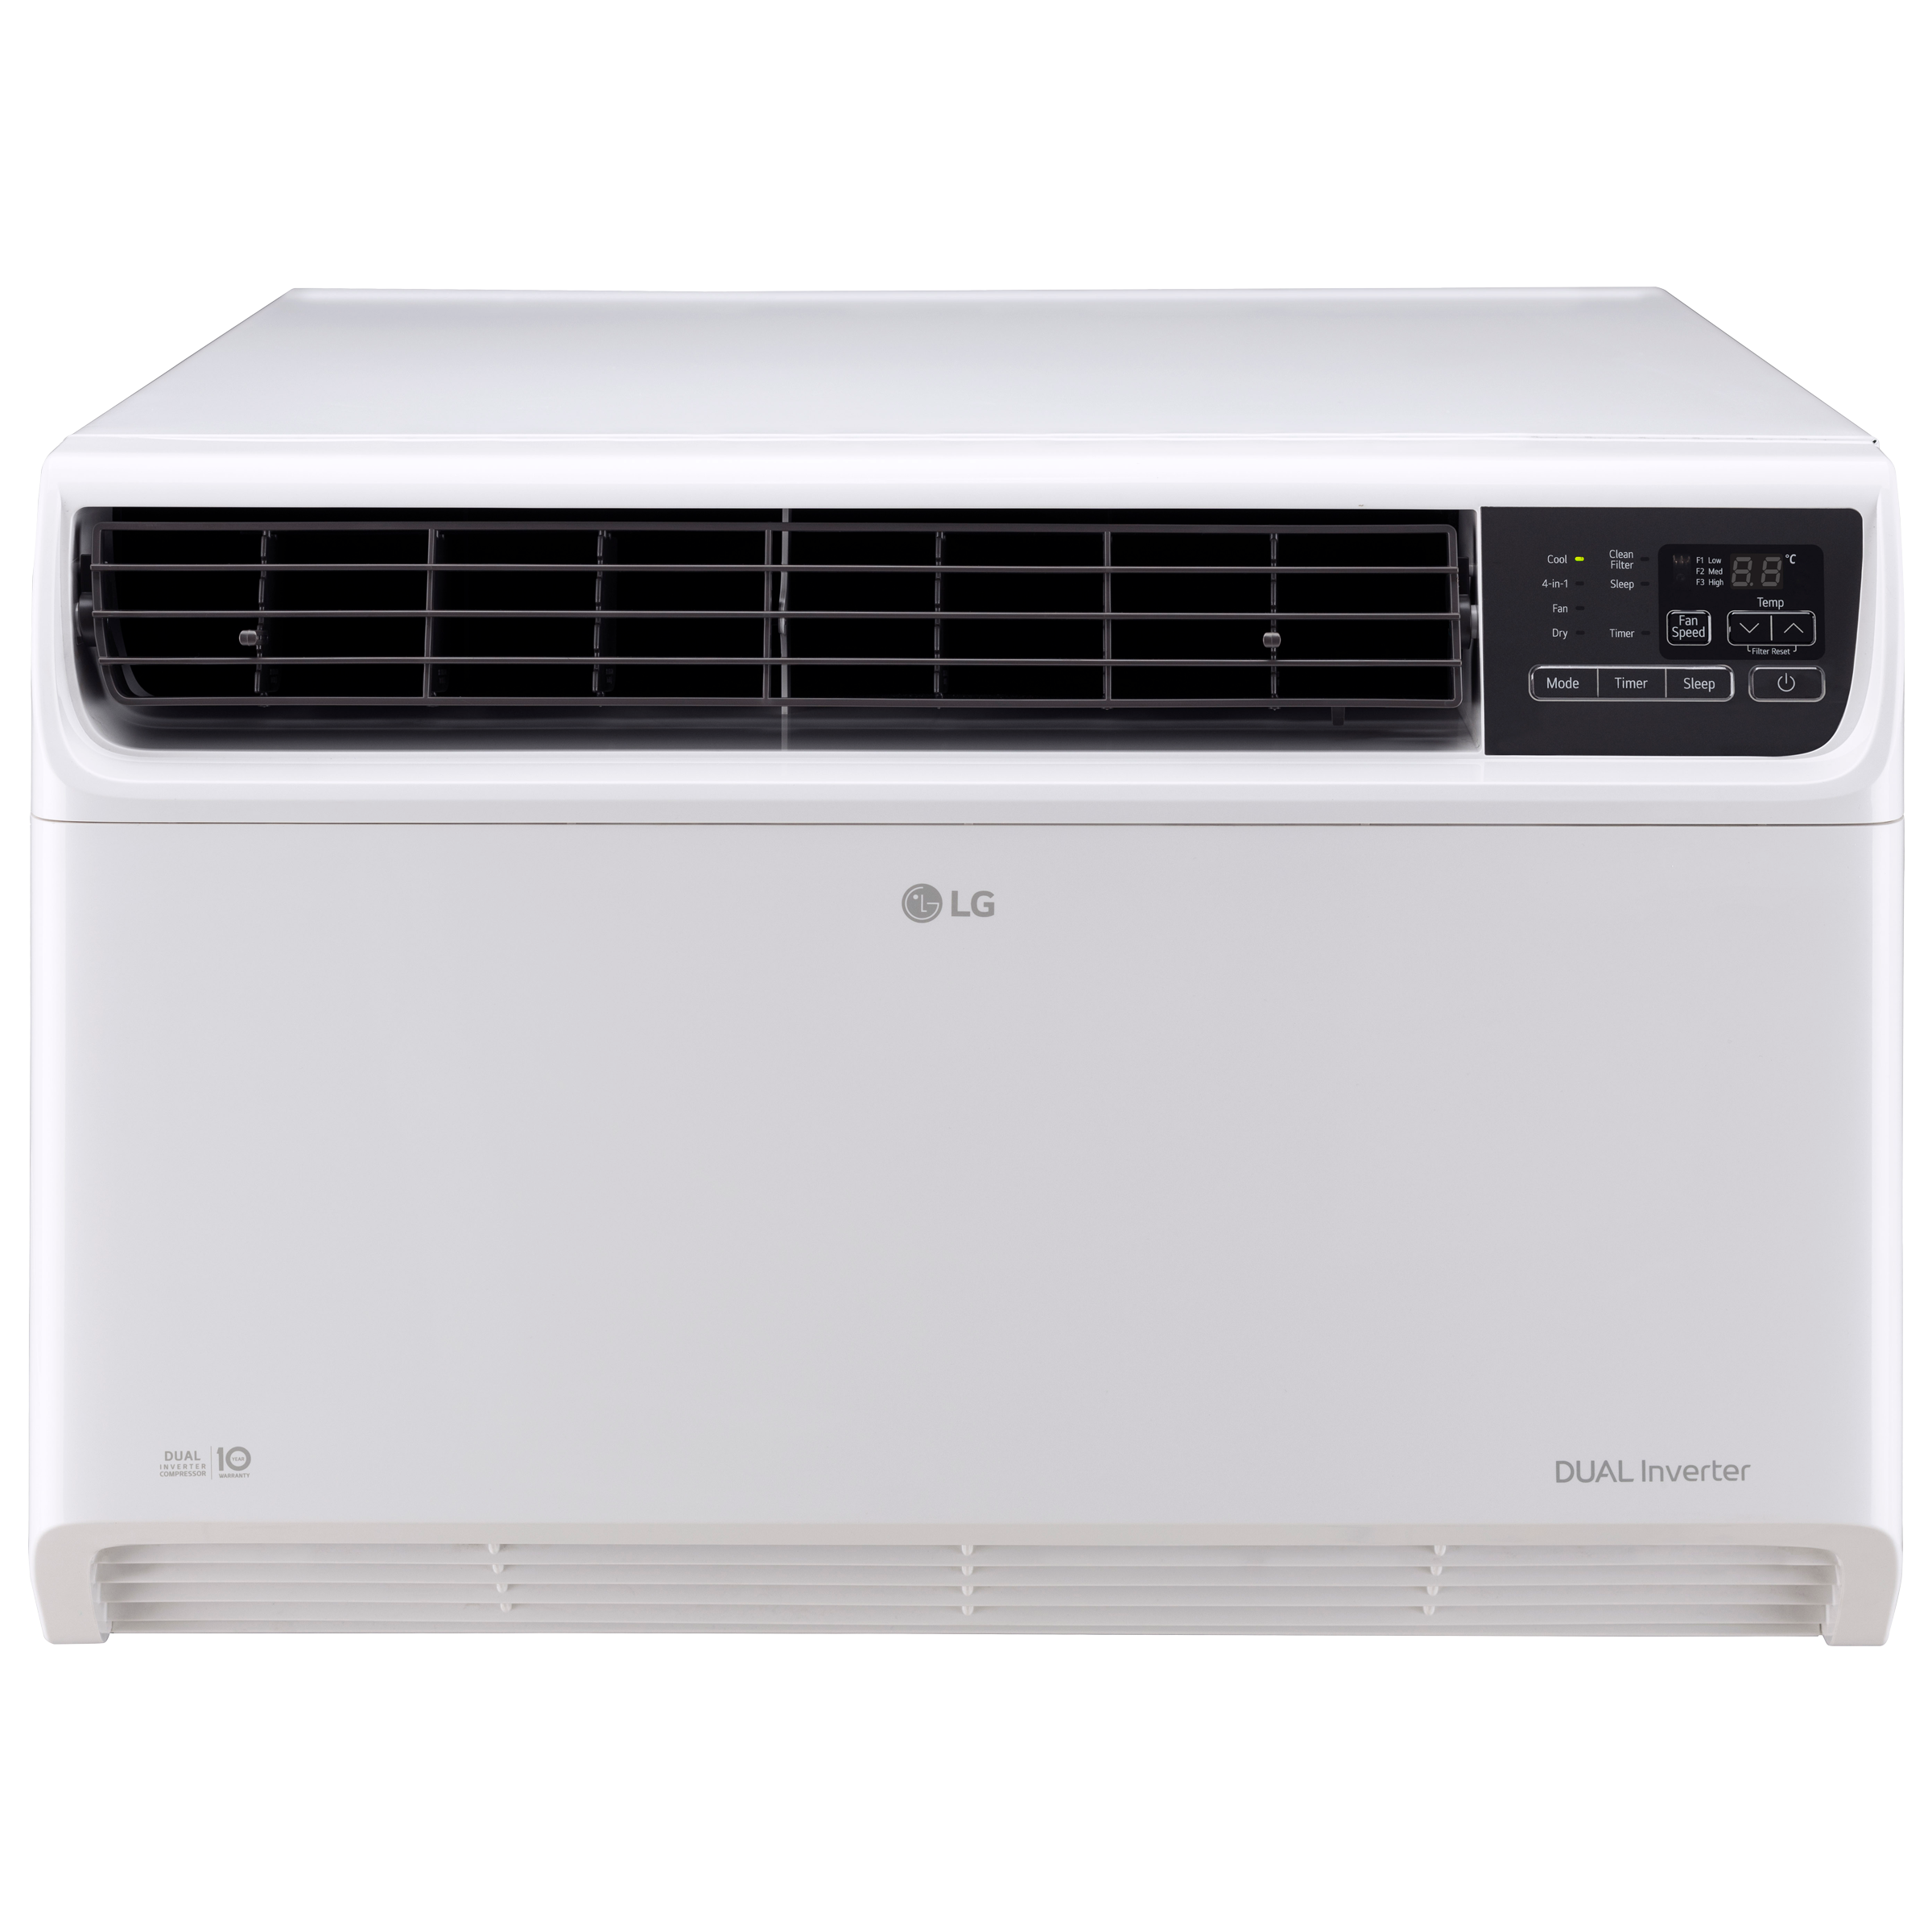 Buy LG 4 in 1 Convertible 1.5 Ton 5 Star Dual Inverter Window AC with